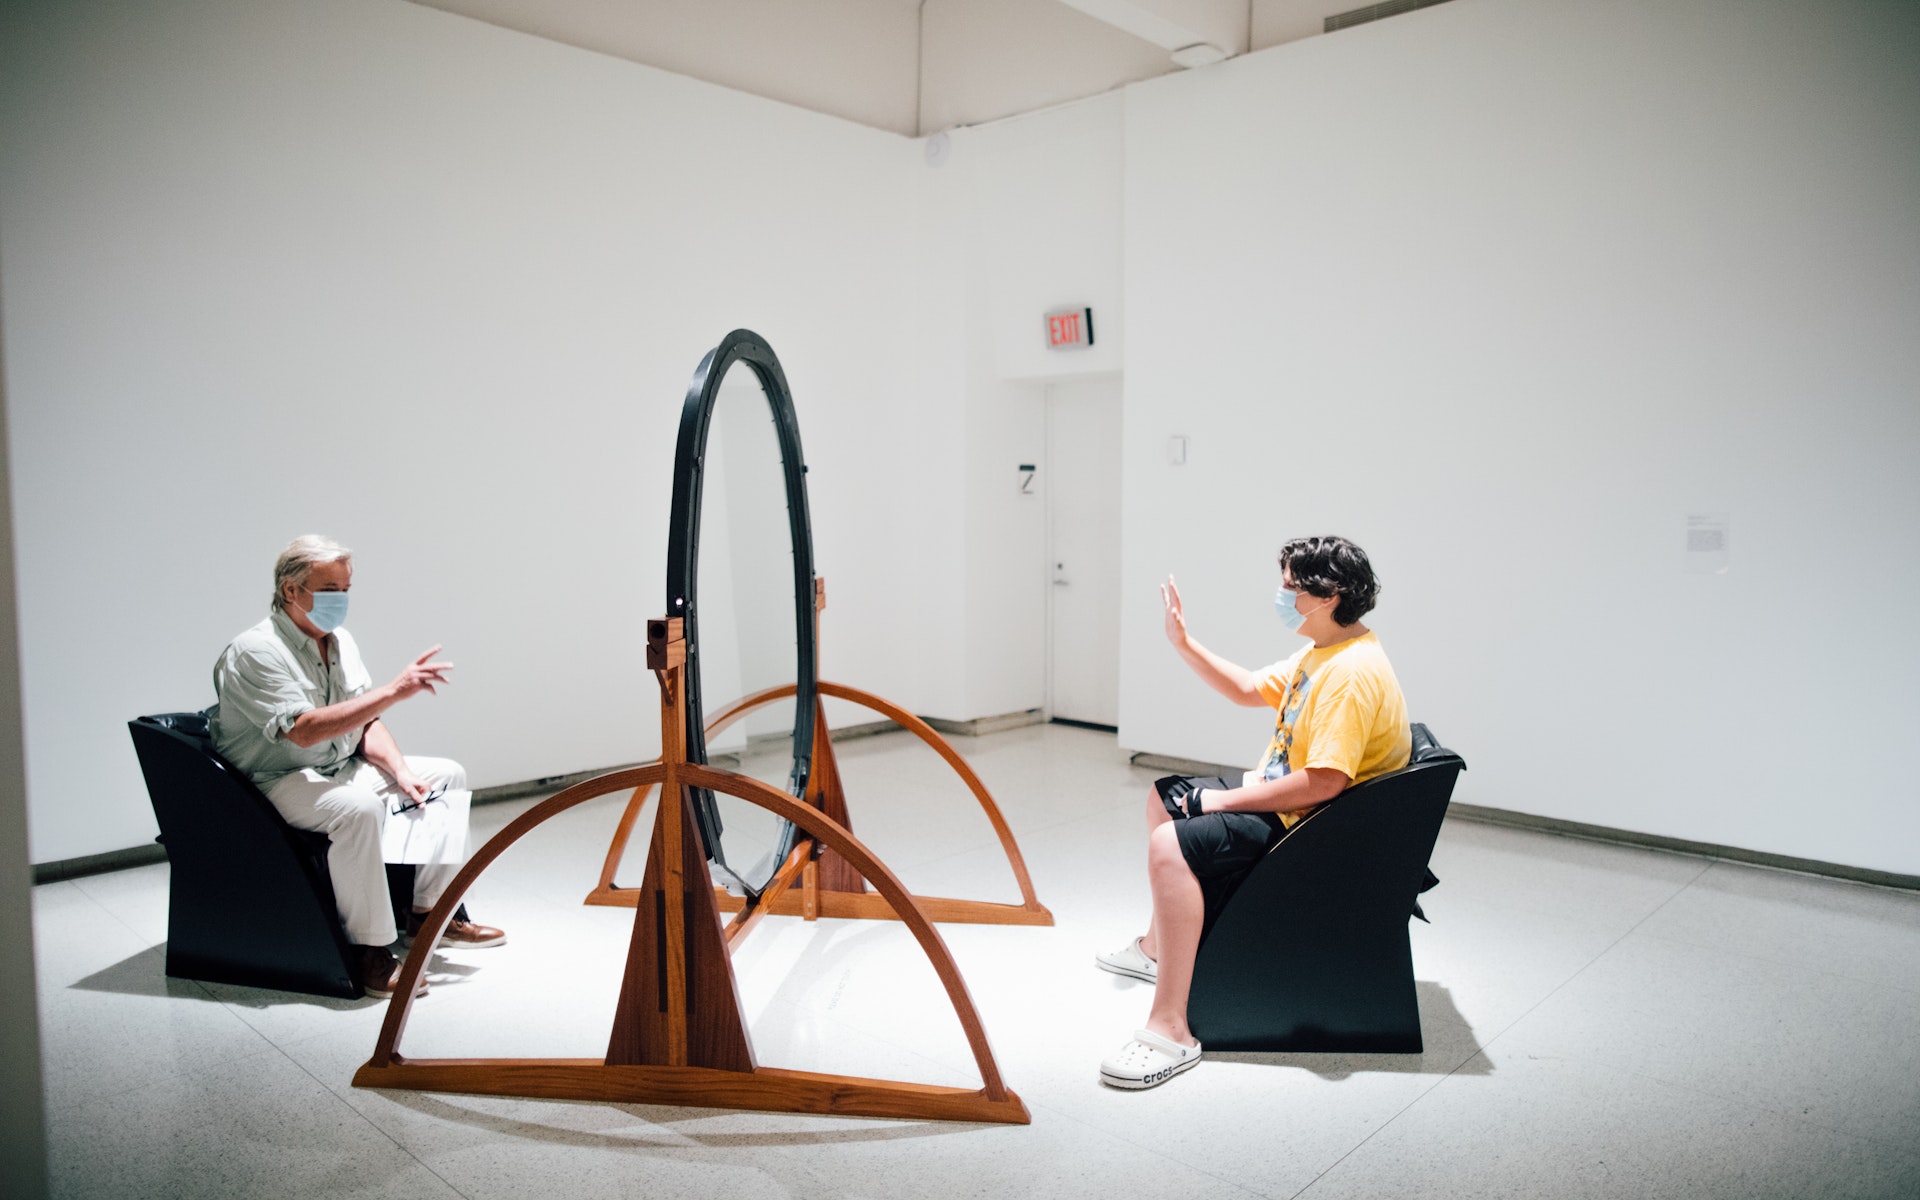 Two people sit in a sculpture consisting of chairs facing eahc other with glass in between.